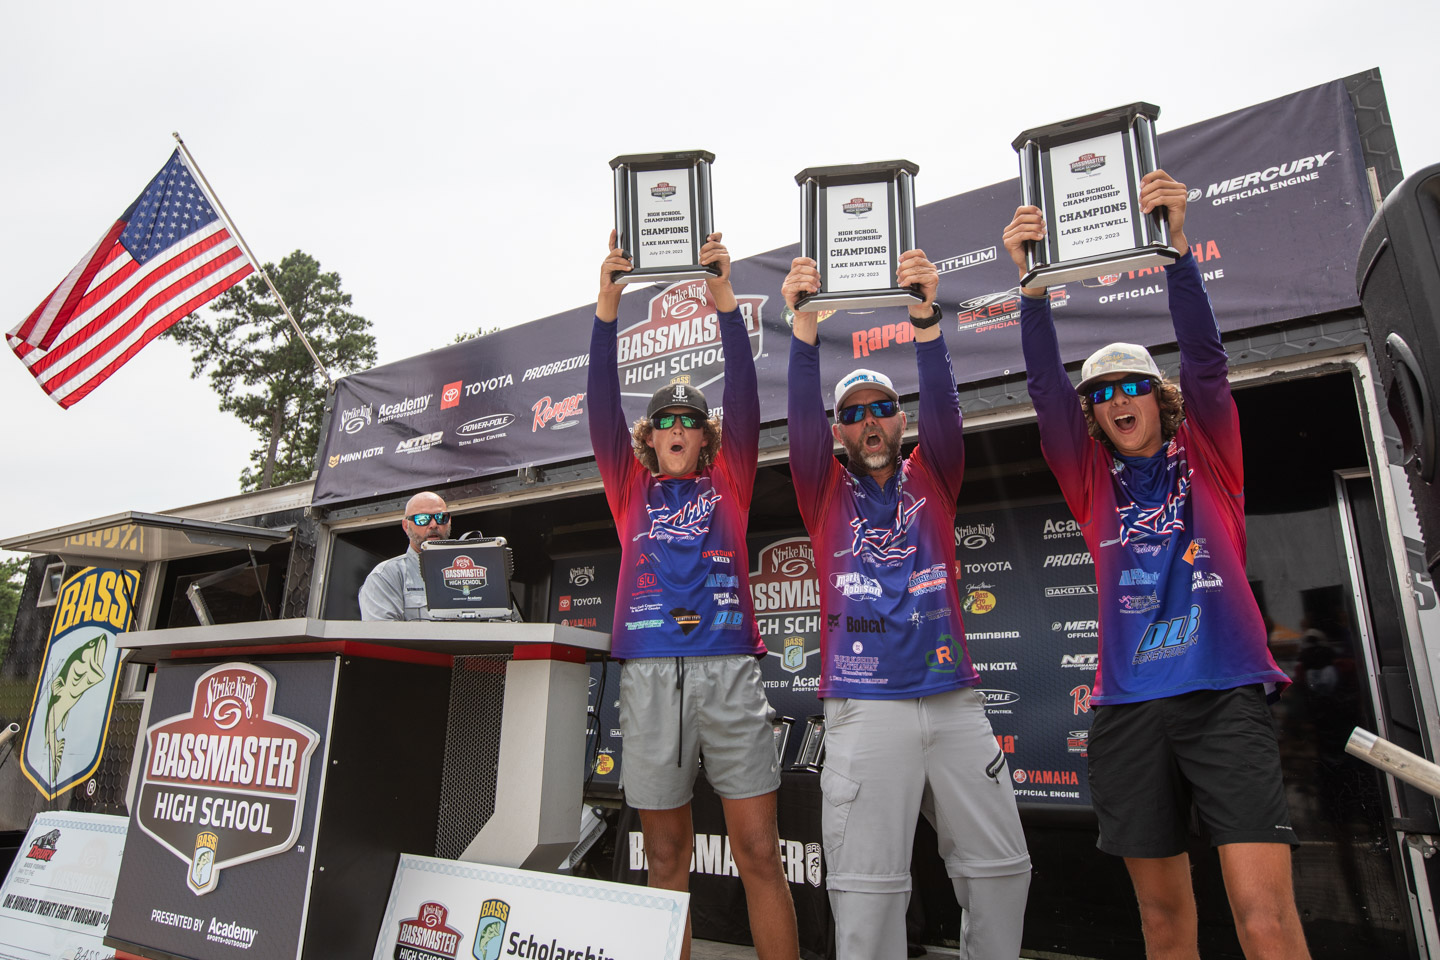 High School Fishing World Finals and National Championship – Day 3 weigh-in  (6/23/2023) - Major League Fishing